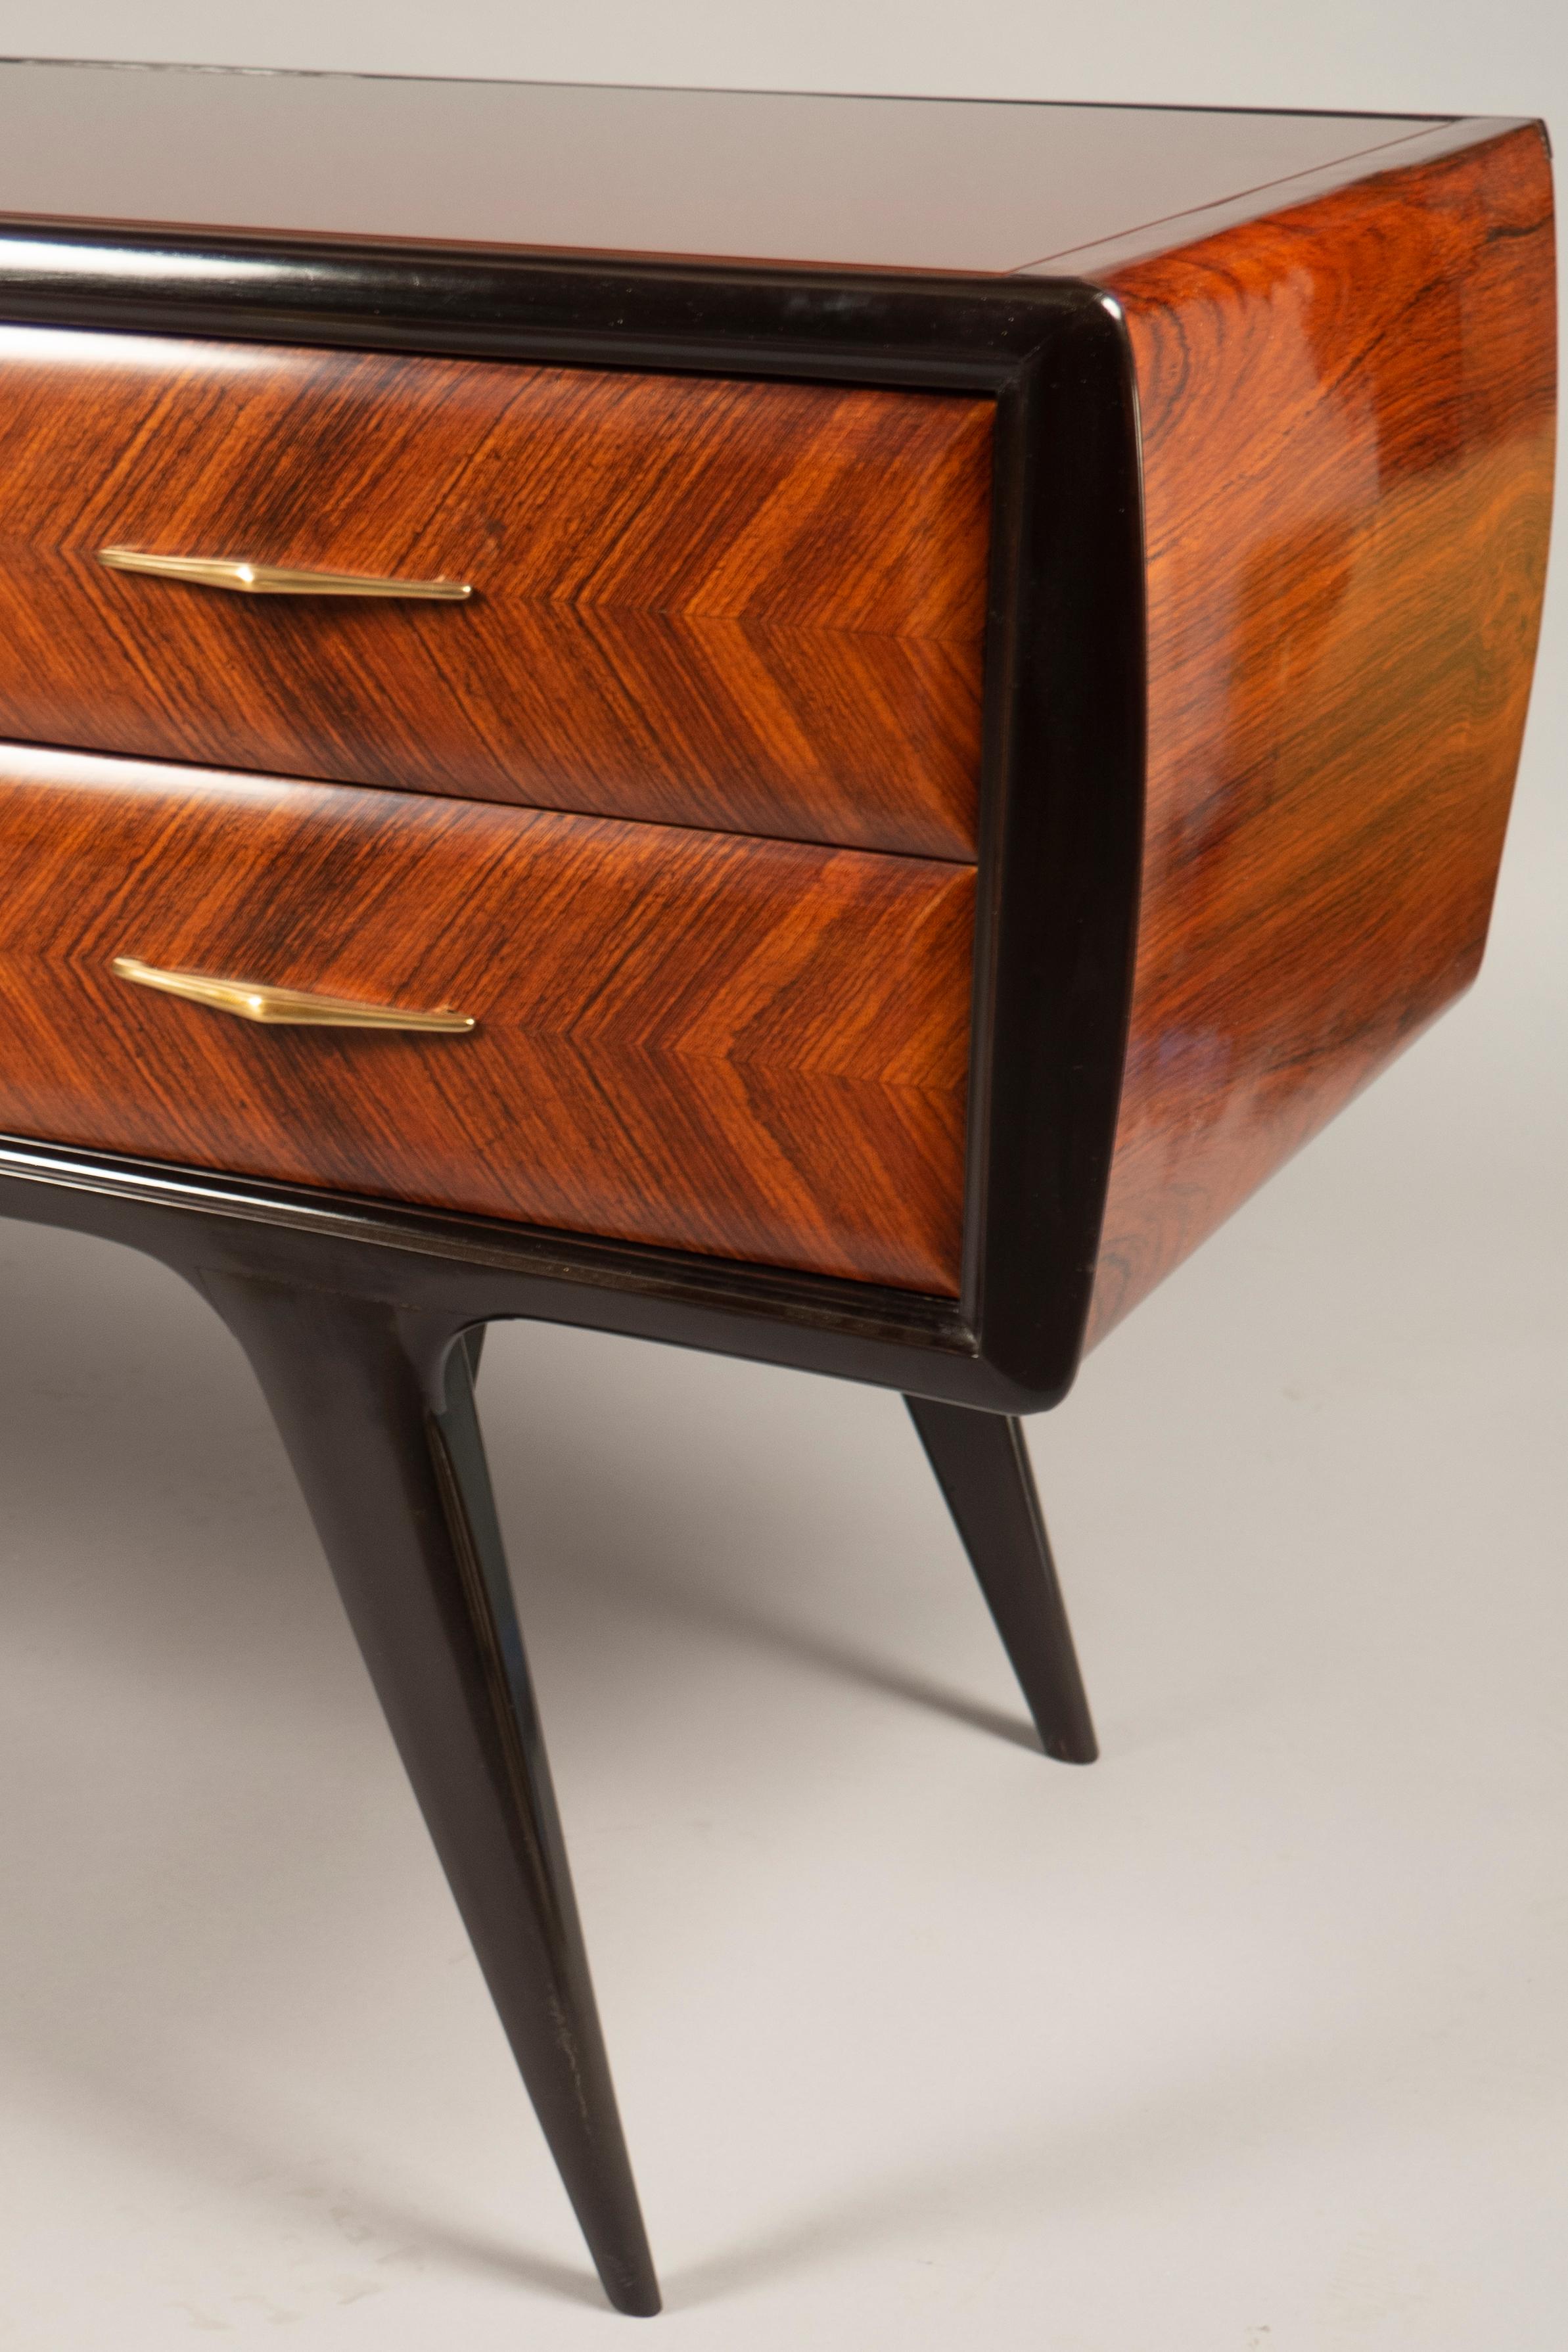 Six-drawer cabinet featuring herringbone wood veneer surrounded by a black wooden frame, raised on tapered legs. The top features a dark maroon glass, which was added by us.